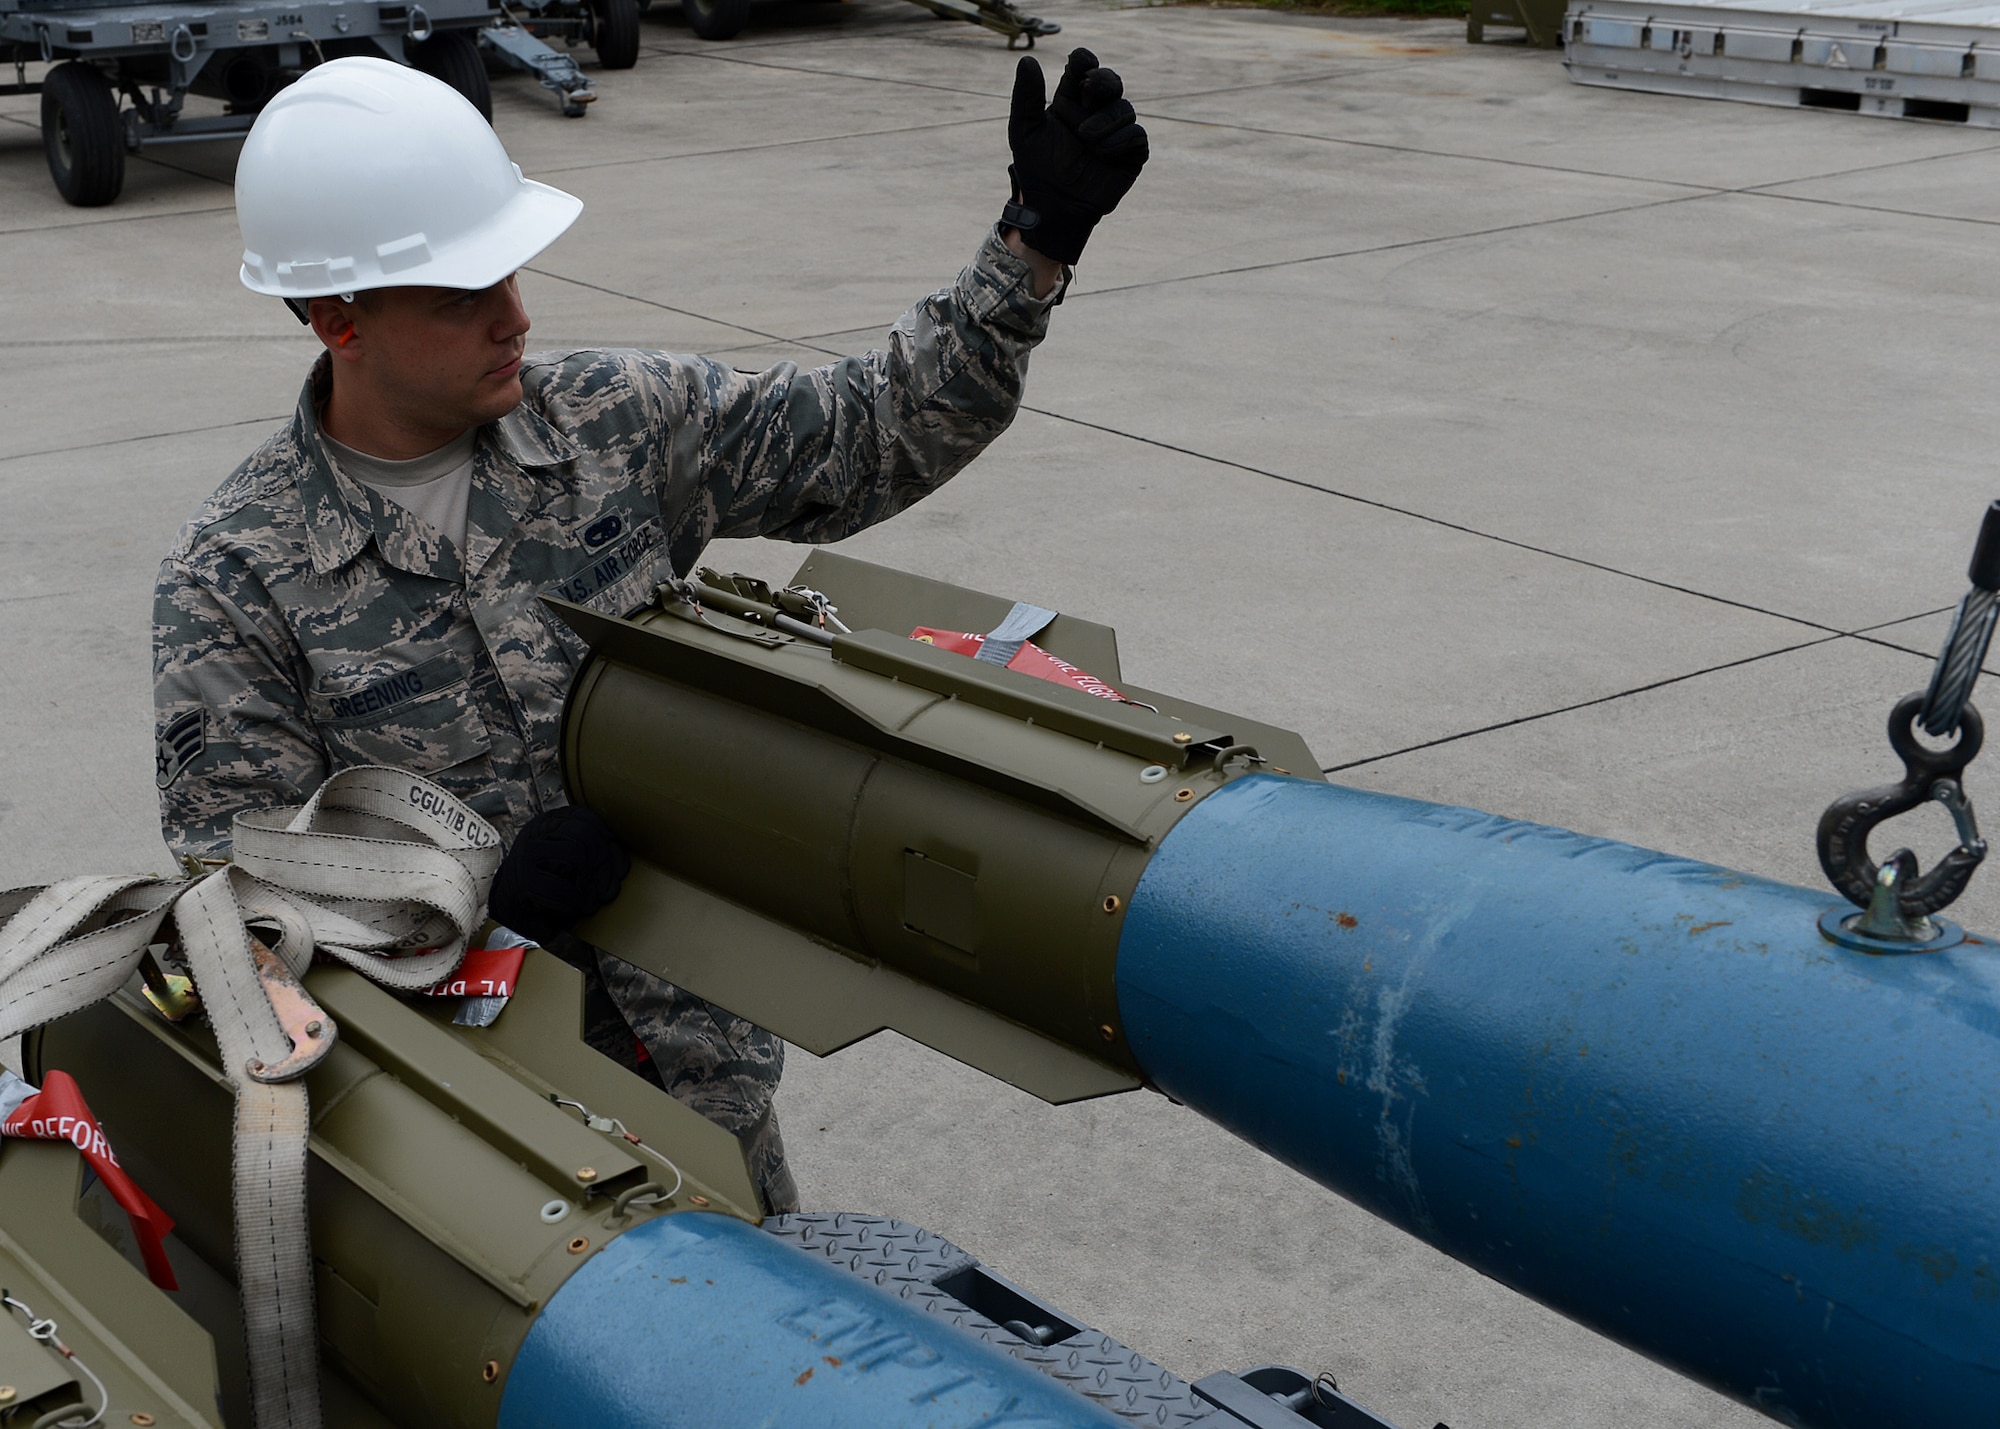 U.S. Air Force Senior Airman Timothy Greening, 52nd Equipment Maintenance Squadron precision guided munitions crew member from Norman, Okla., guides a Bomb Drop Unit-50 training explosive onto a transportation trailer at Lask Air Base, Poland, June 12, 2014. The 52nd EMS from Spangdahelm Air Base, Germany, supported the U.S. Aviation Detachment Rotation 14-3, U.S. Navy-led BALTOPS 14 and Polish led-EAGLE  TALON by loading 18 U.S. Air Force F-16 Fighting Falcon fighter aircraft with munitions. The Av-Det's mission is to increase interoperability and bilateral ties with Polish allies. (U.S. Air Force photo by Airman 1st Class Kyle Gese/Released)